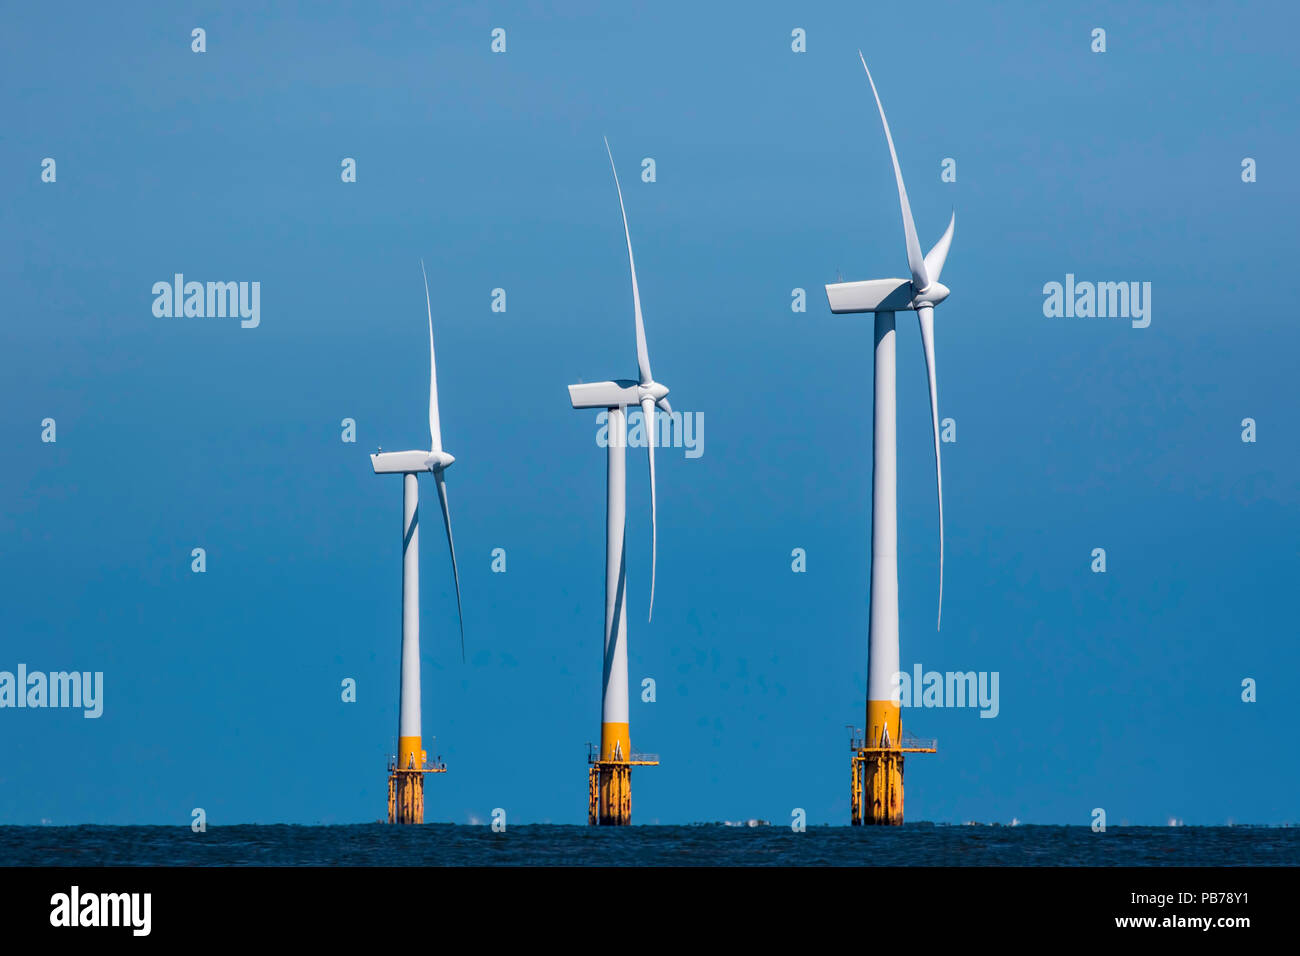 The rise of environmentally-friendly wind power.  Offshore clean energy wind farm. Three synchronised wind power turbines in profile ascending height. Stock Photo